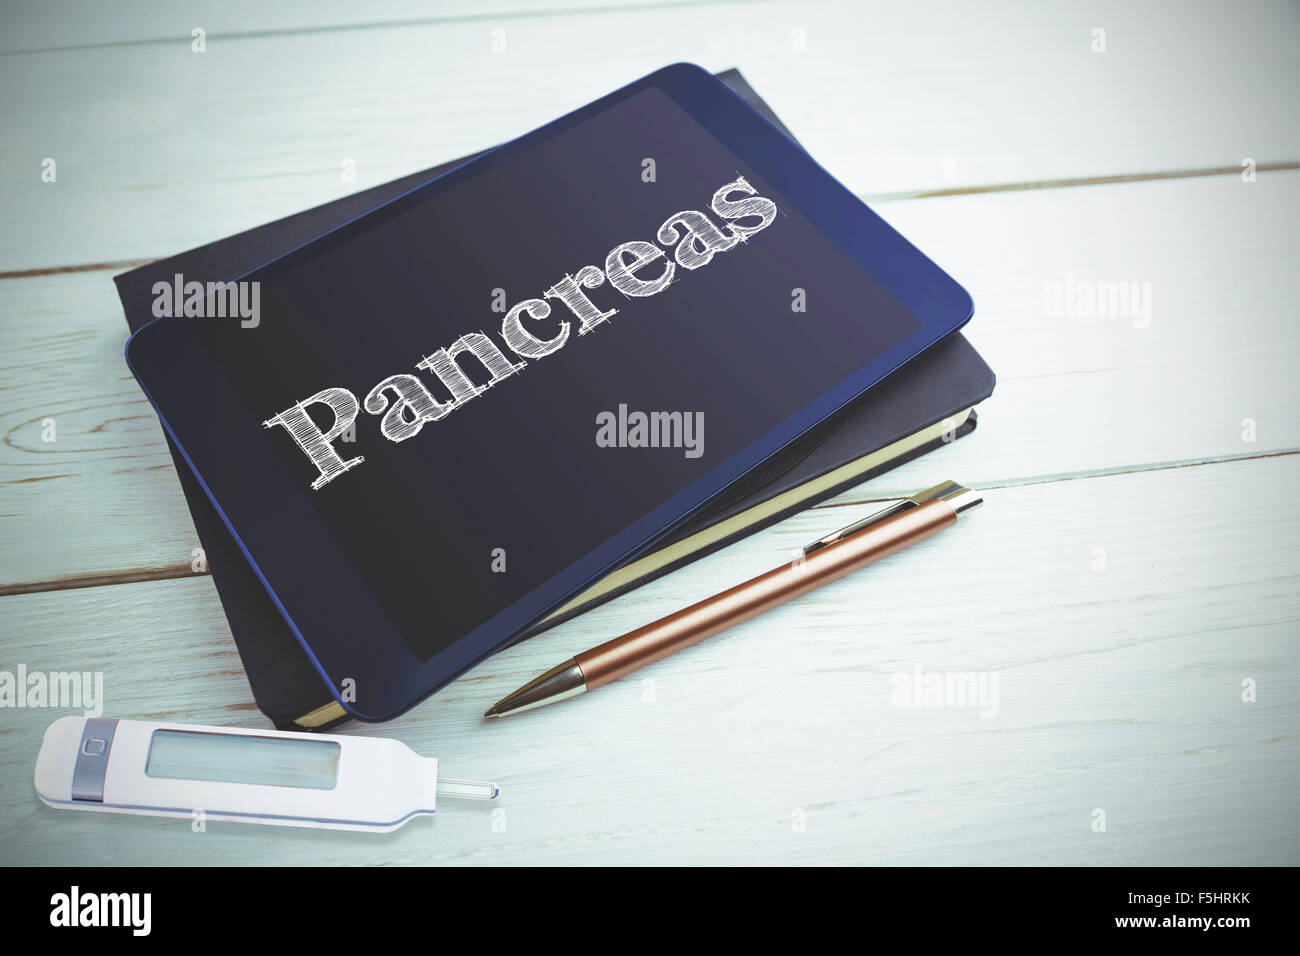 Pancreas against view of a book and tablet lying on desk Stock Photo